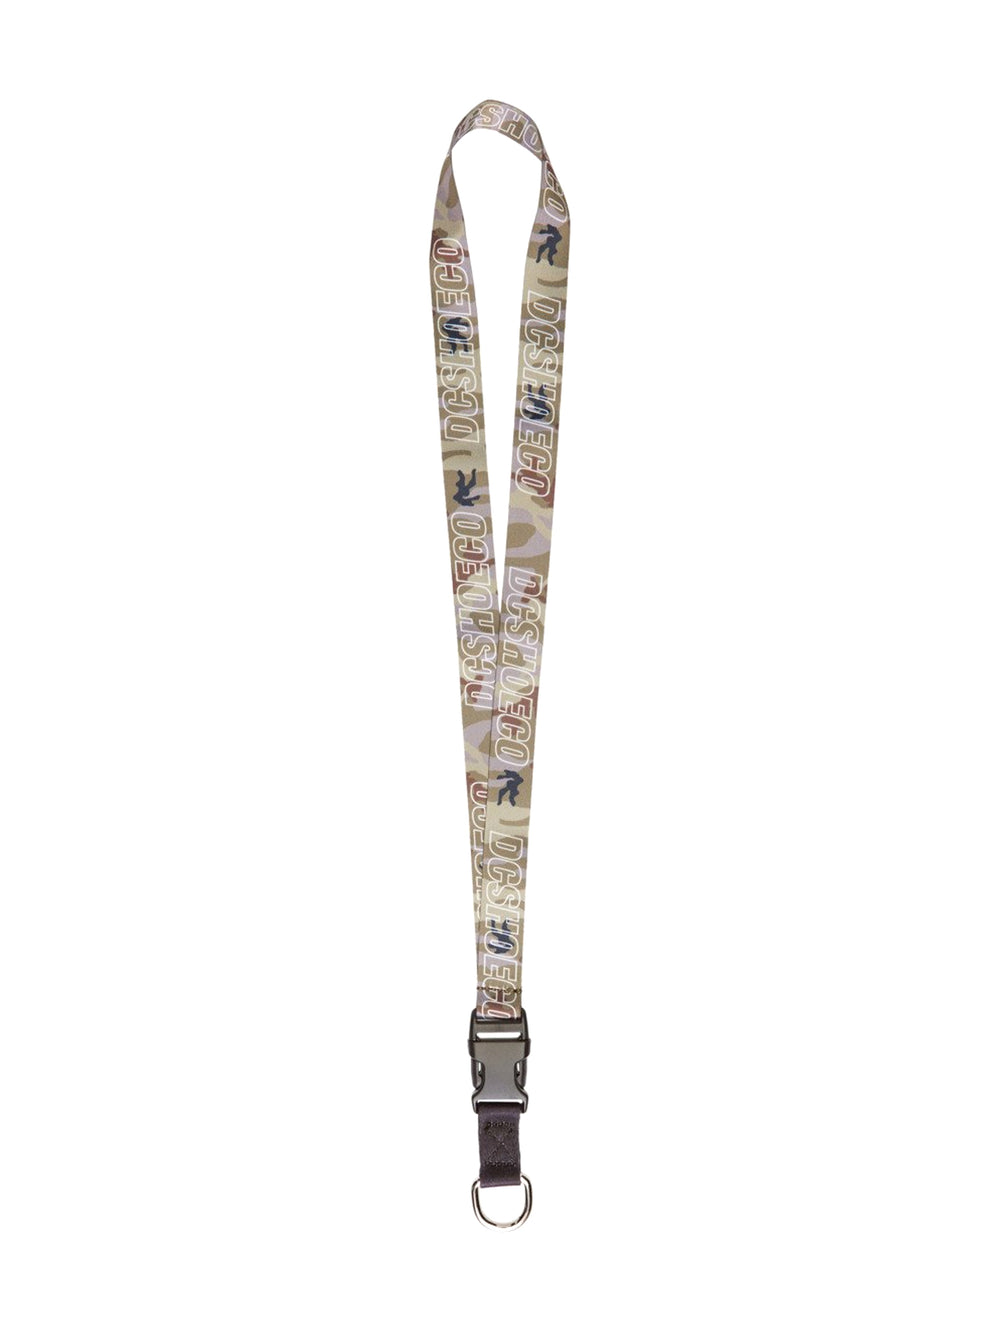 DC SHOES DC LANYARD - CLEARANCE